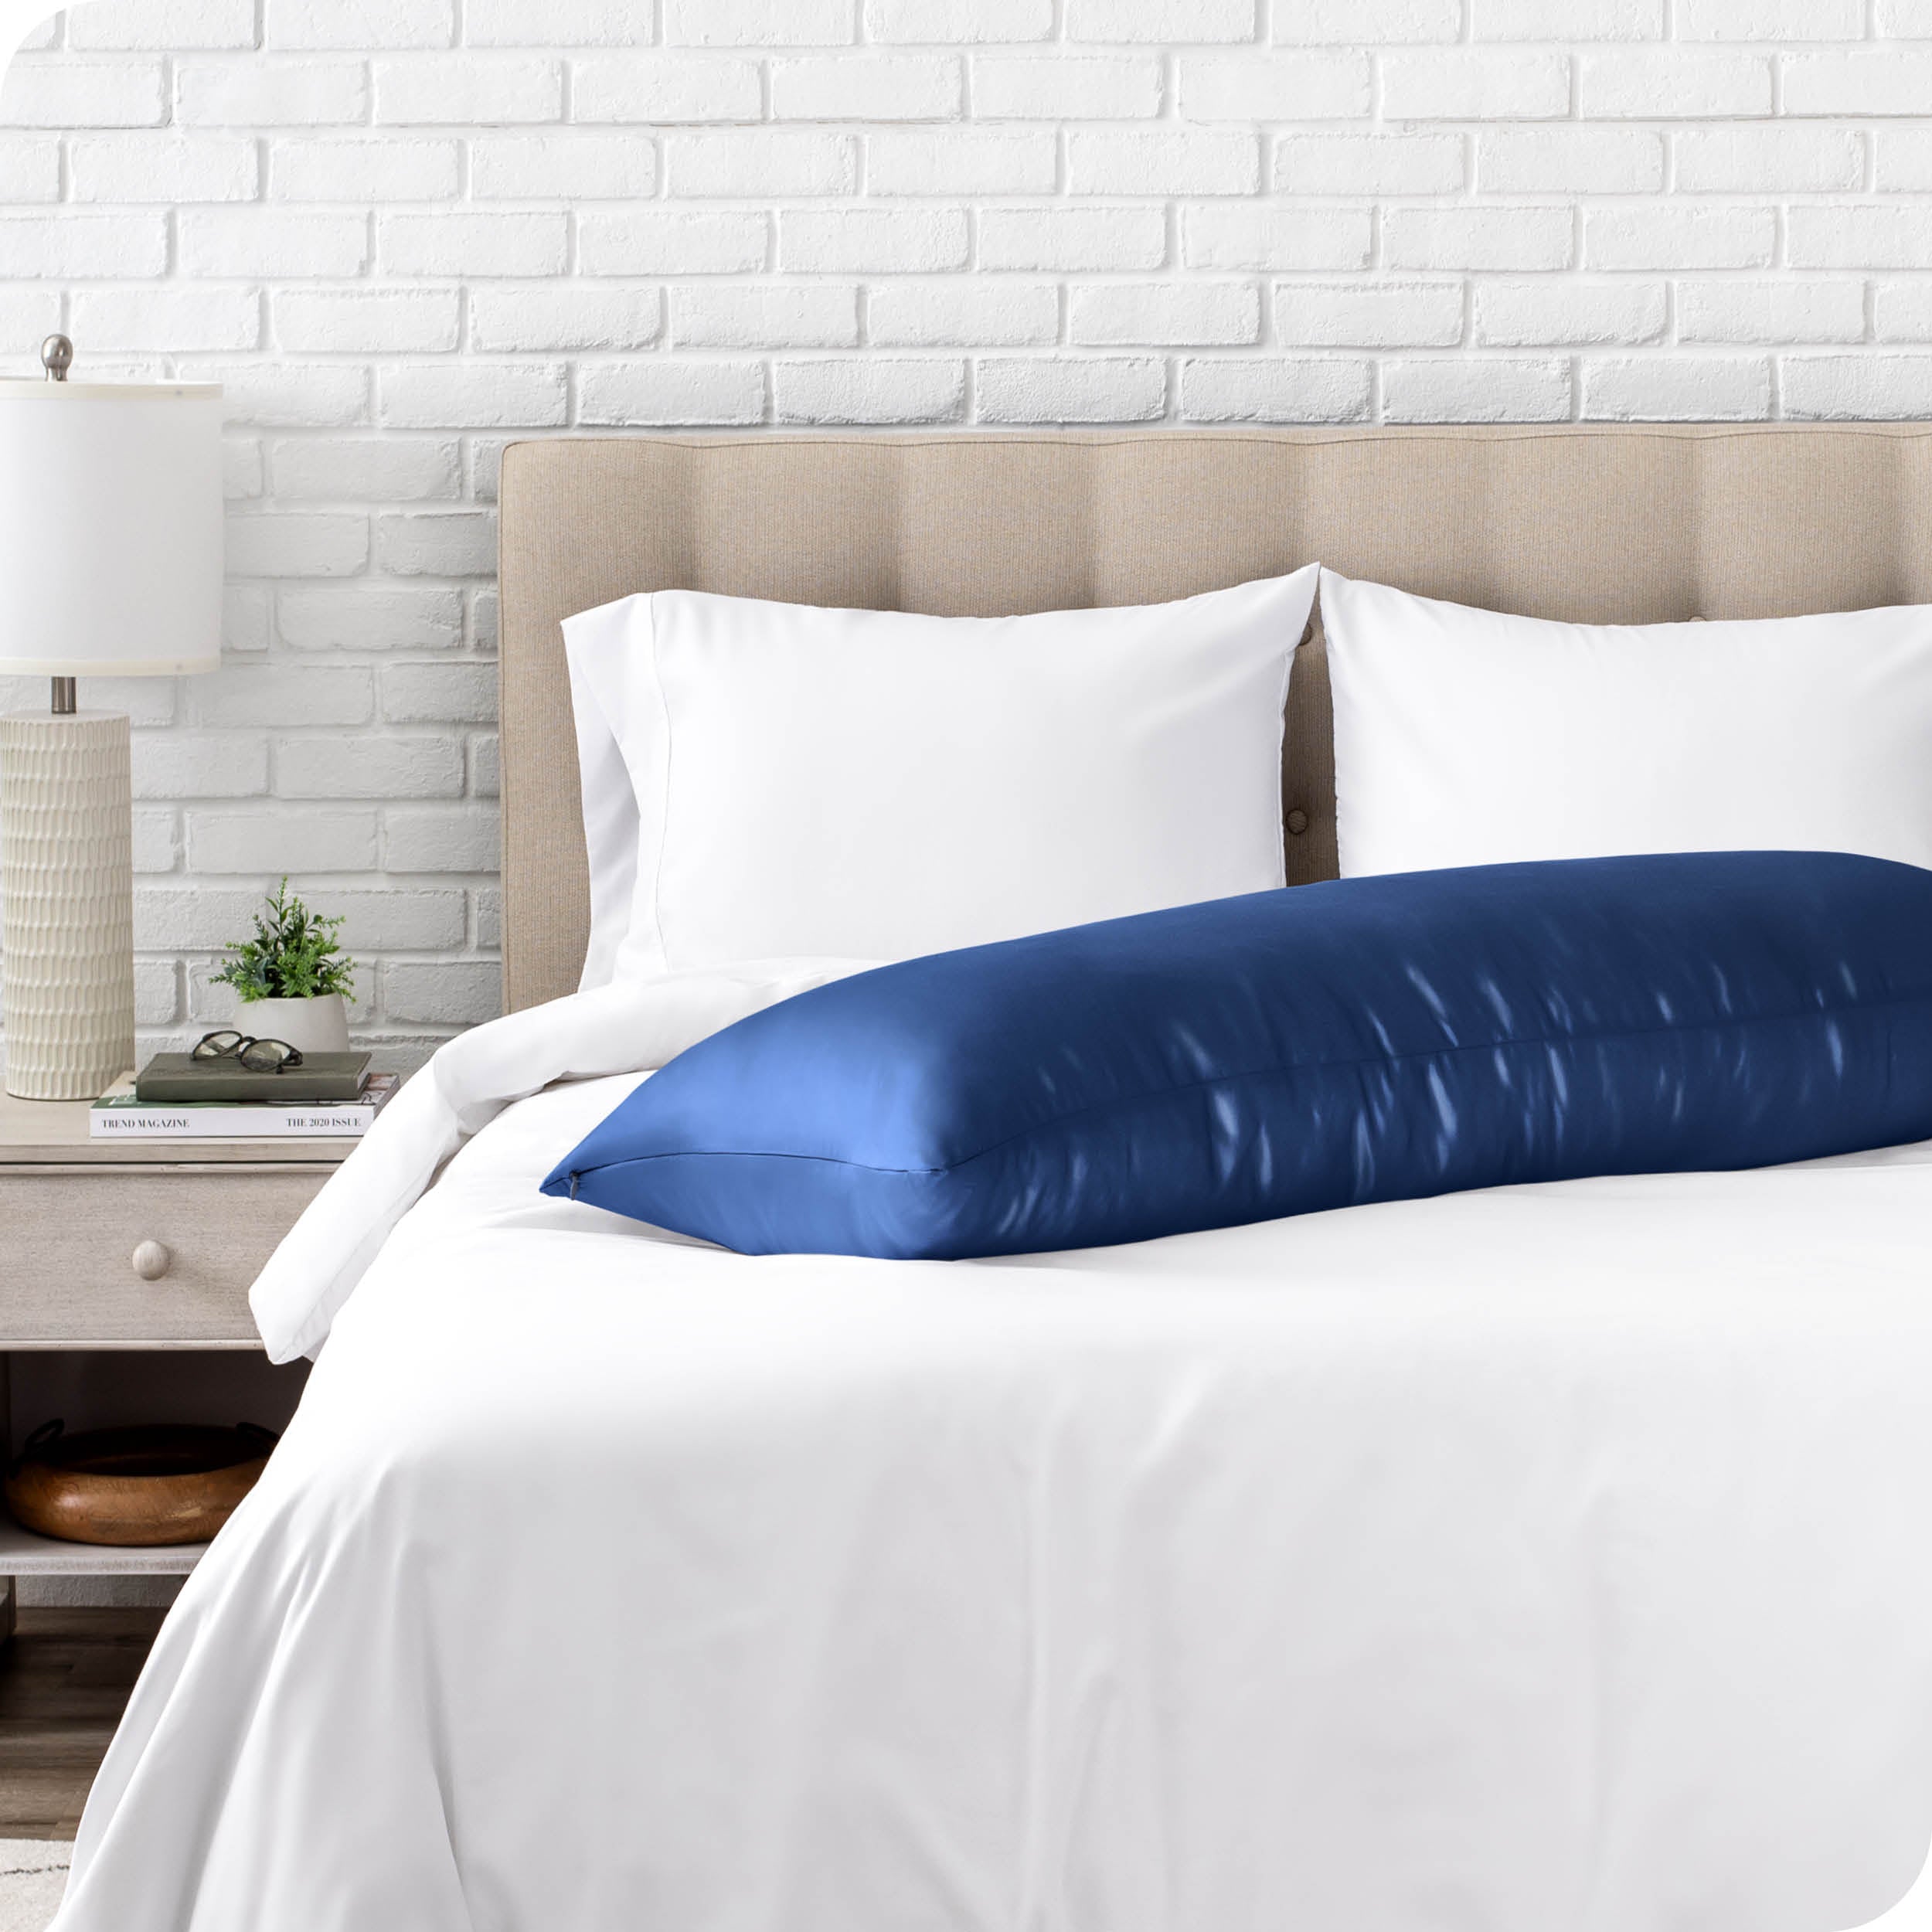 A silk body pillowcase on a pillow resting on a bed